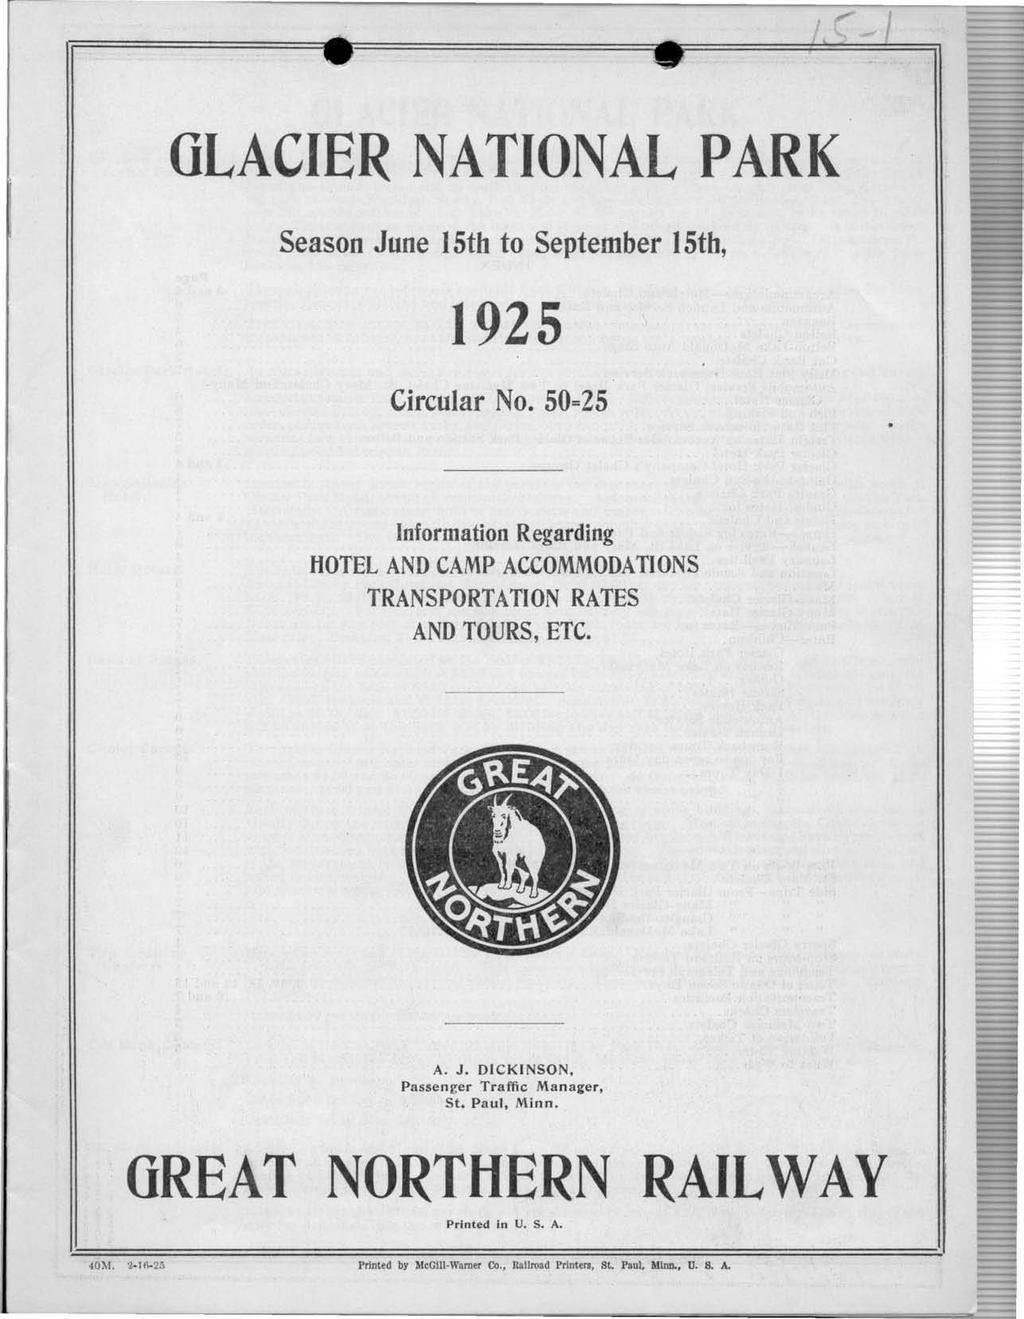 GLACIER NATIONAL PARK Season June 5th to September 5th, 925 Circular No. 50=25 Information Regarding HOTEL AND CAMP ACCOMMODATIONS TRANSPORTATION RATES AND TOURS, ETC. A. J. DICKINSON, Passenger Traffic Manager, St.